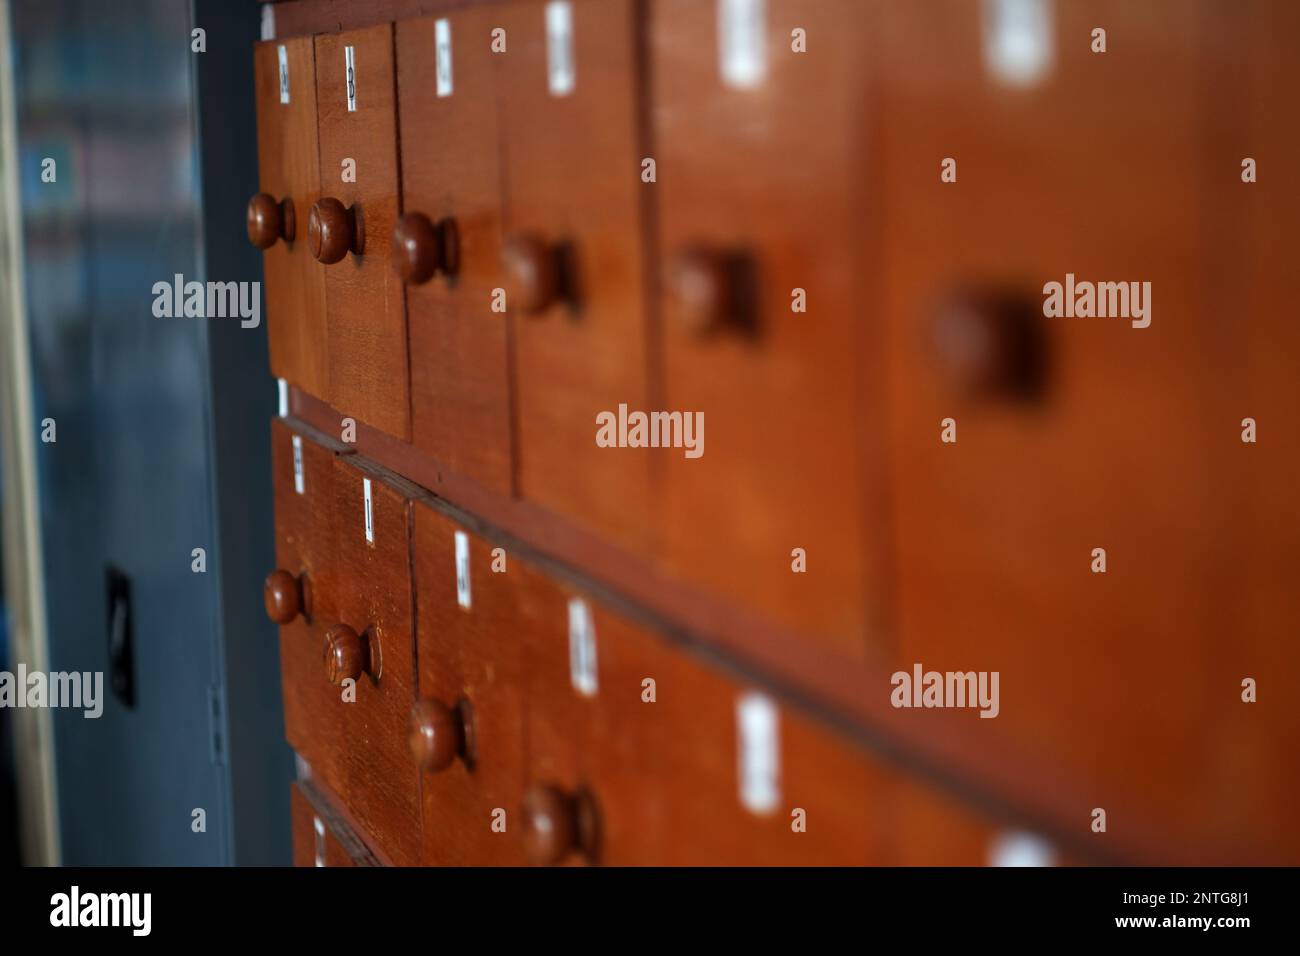 A Wooden Locker With The Function Of Storing Small Objects In The School Library Stock Photo